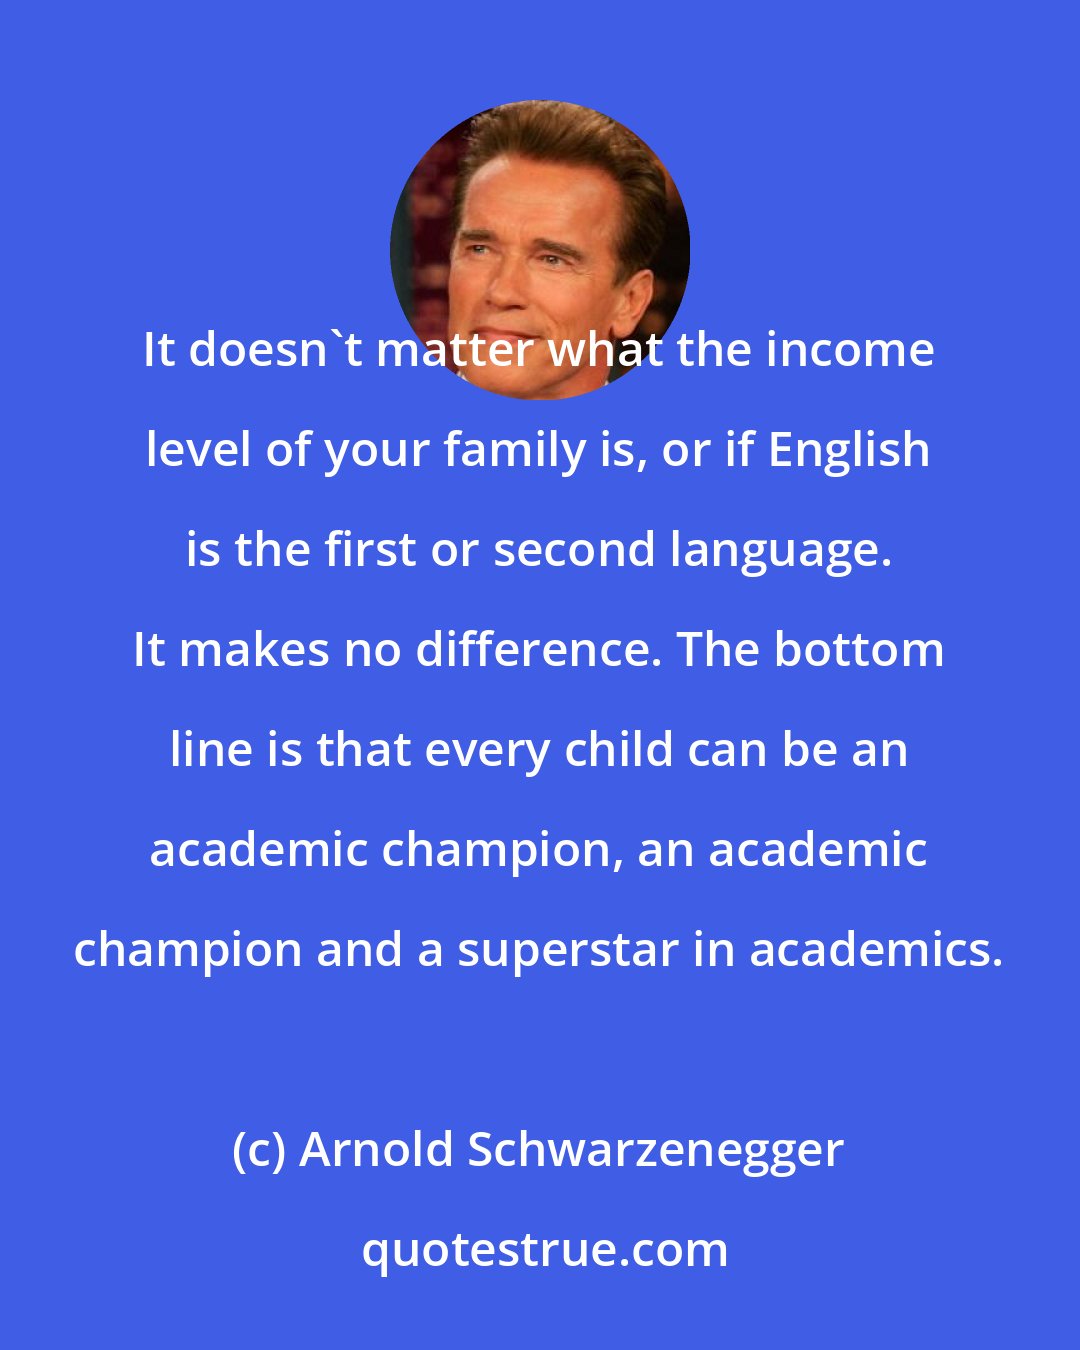 Arnold Schwarzenegger: It doesn't matter what the income level of your family is, or if English is the first or second language. It makes no difference. The bottom line is that every child can be an academic champion, an academic champion and a superstar in academics.